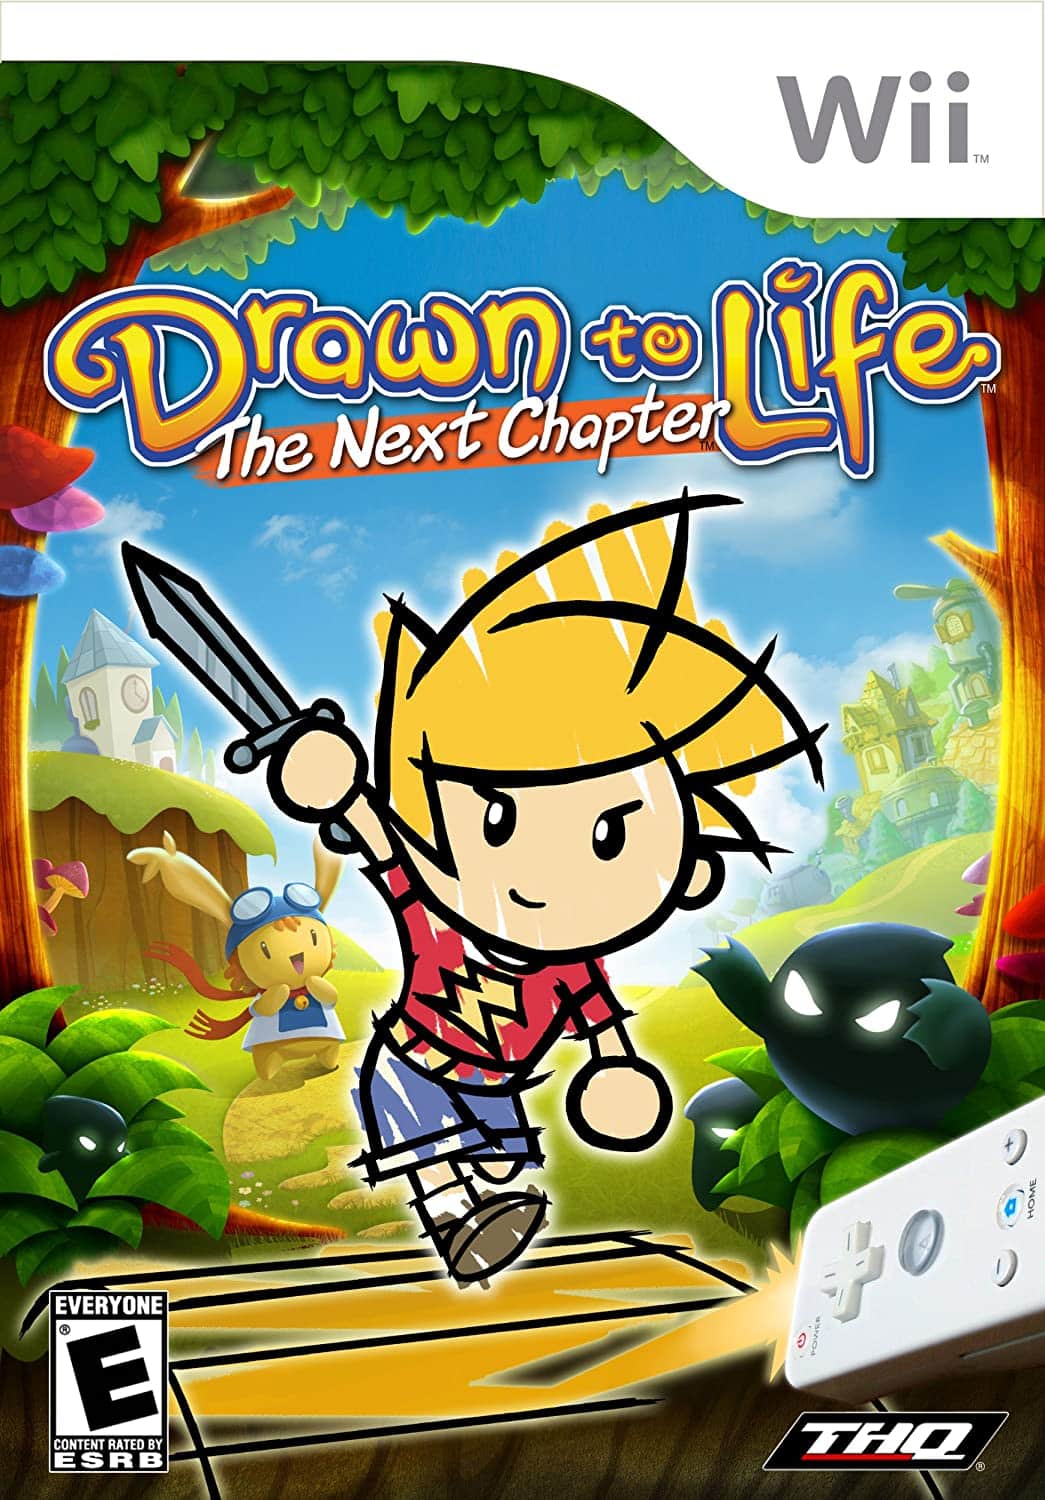 Drawn to Life: The Next Chapter player count stats